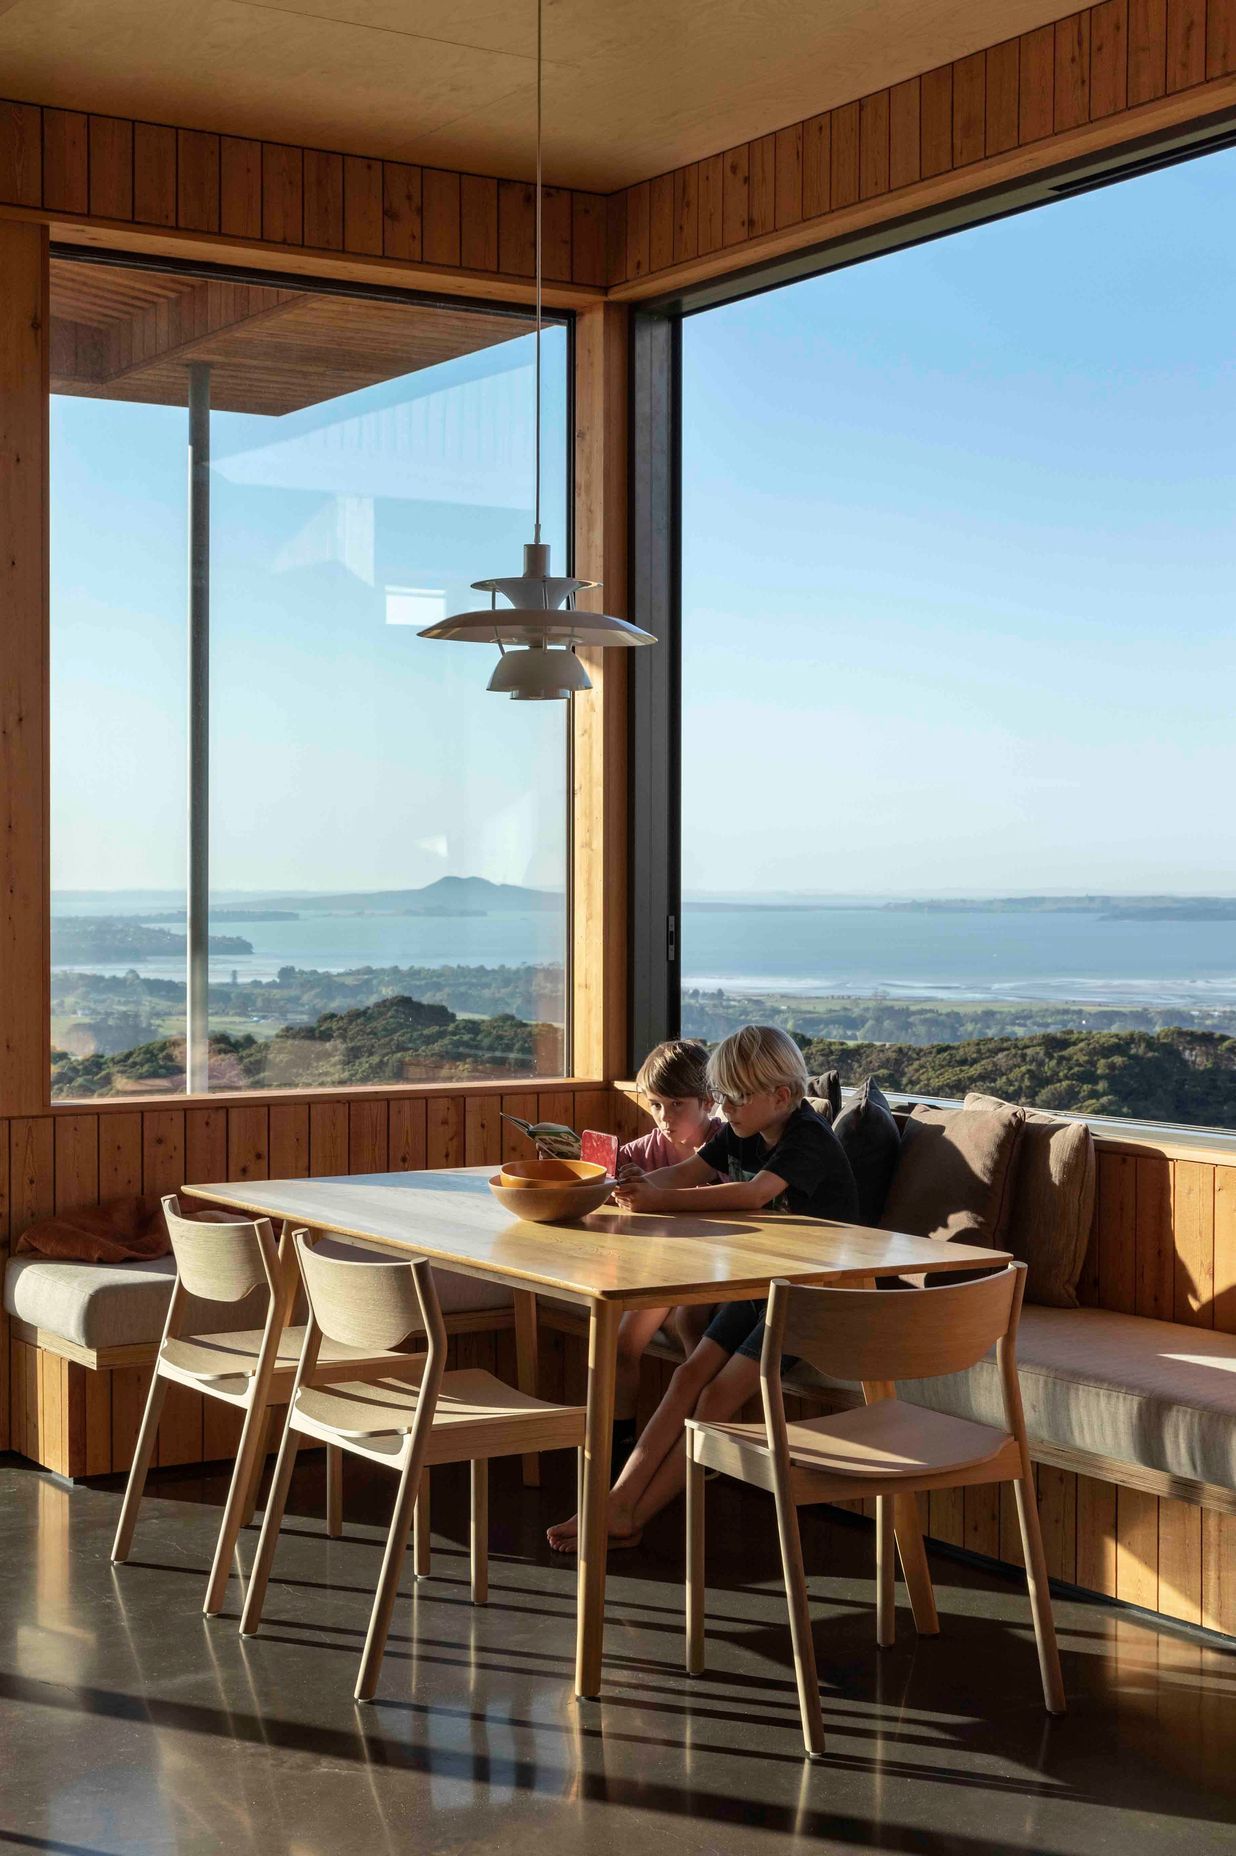 From the kitchen table, panoramic views of the coastline can be enjoyed.